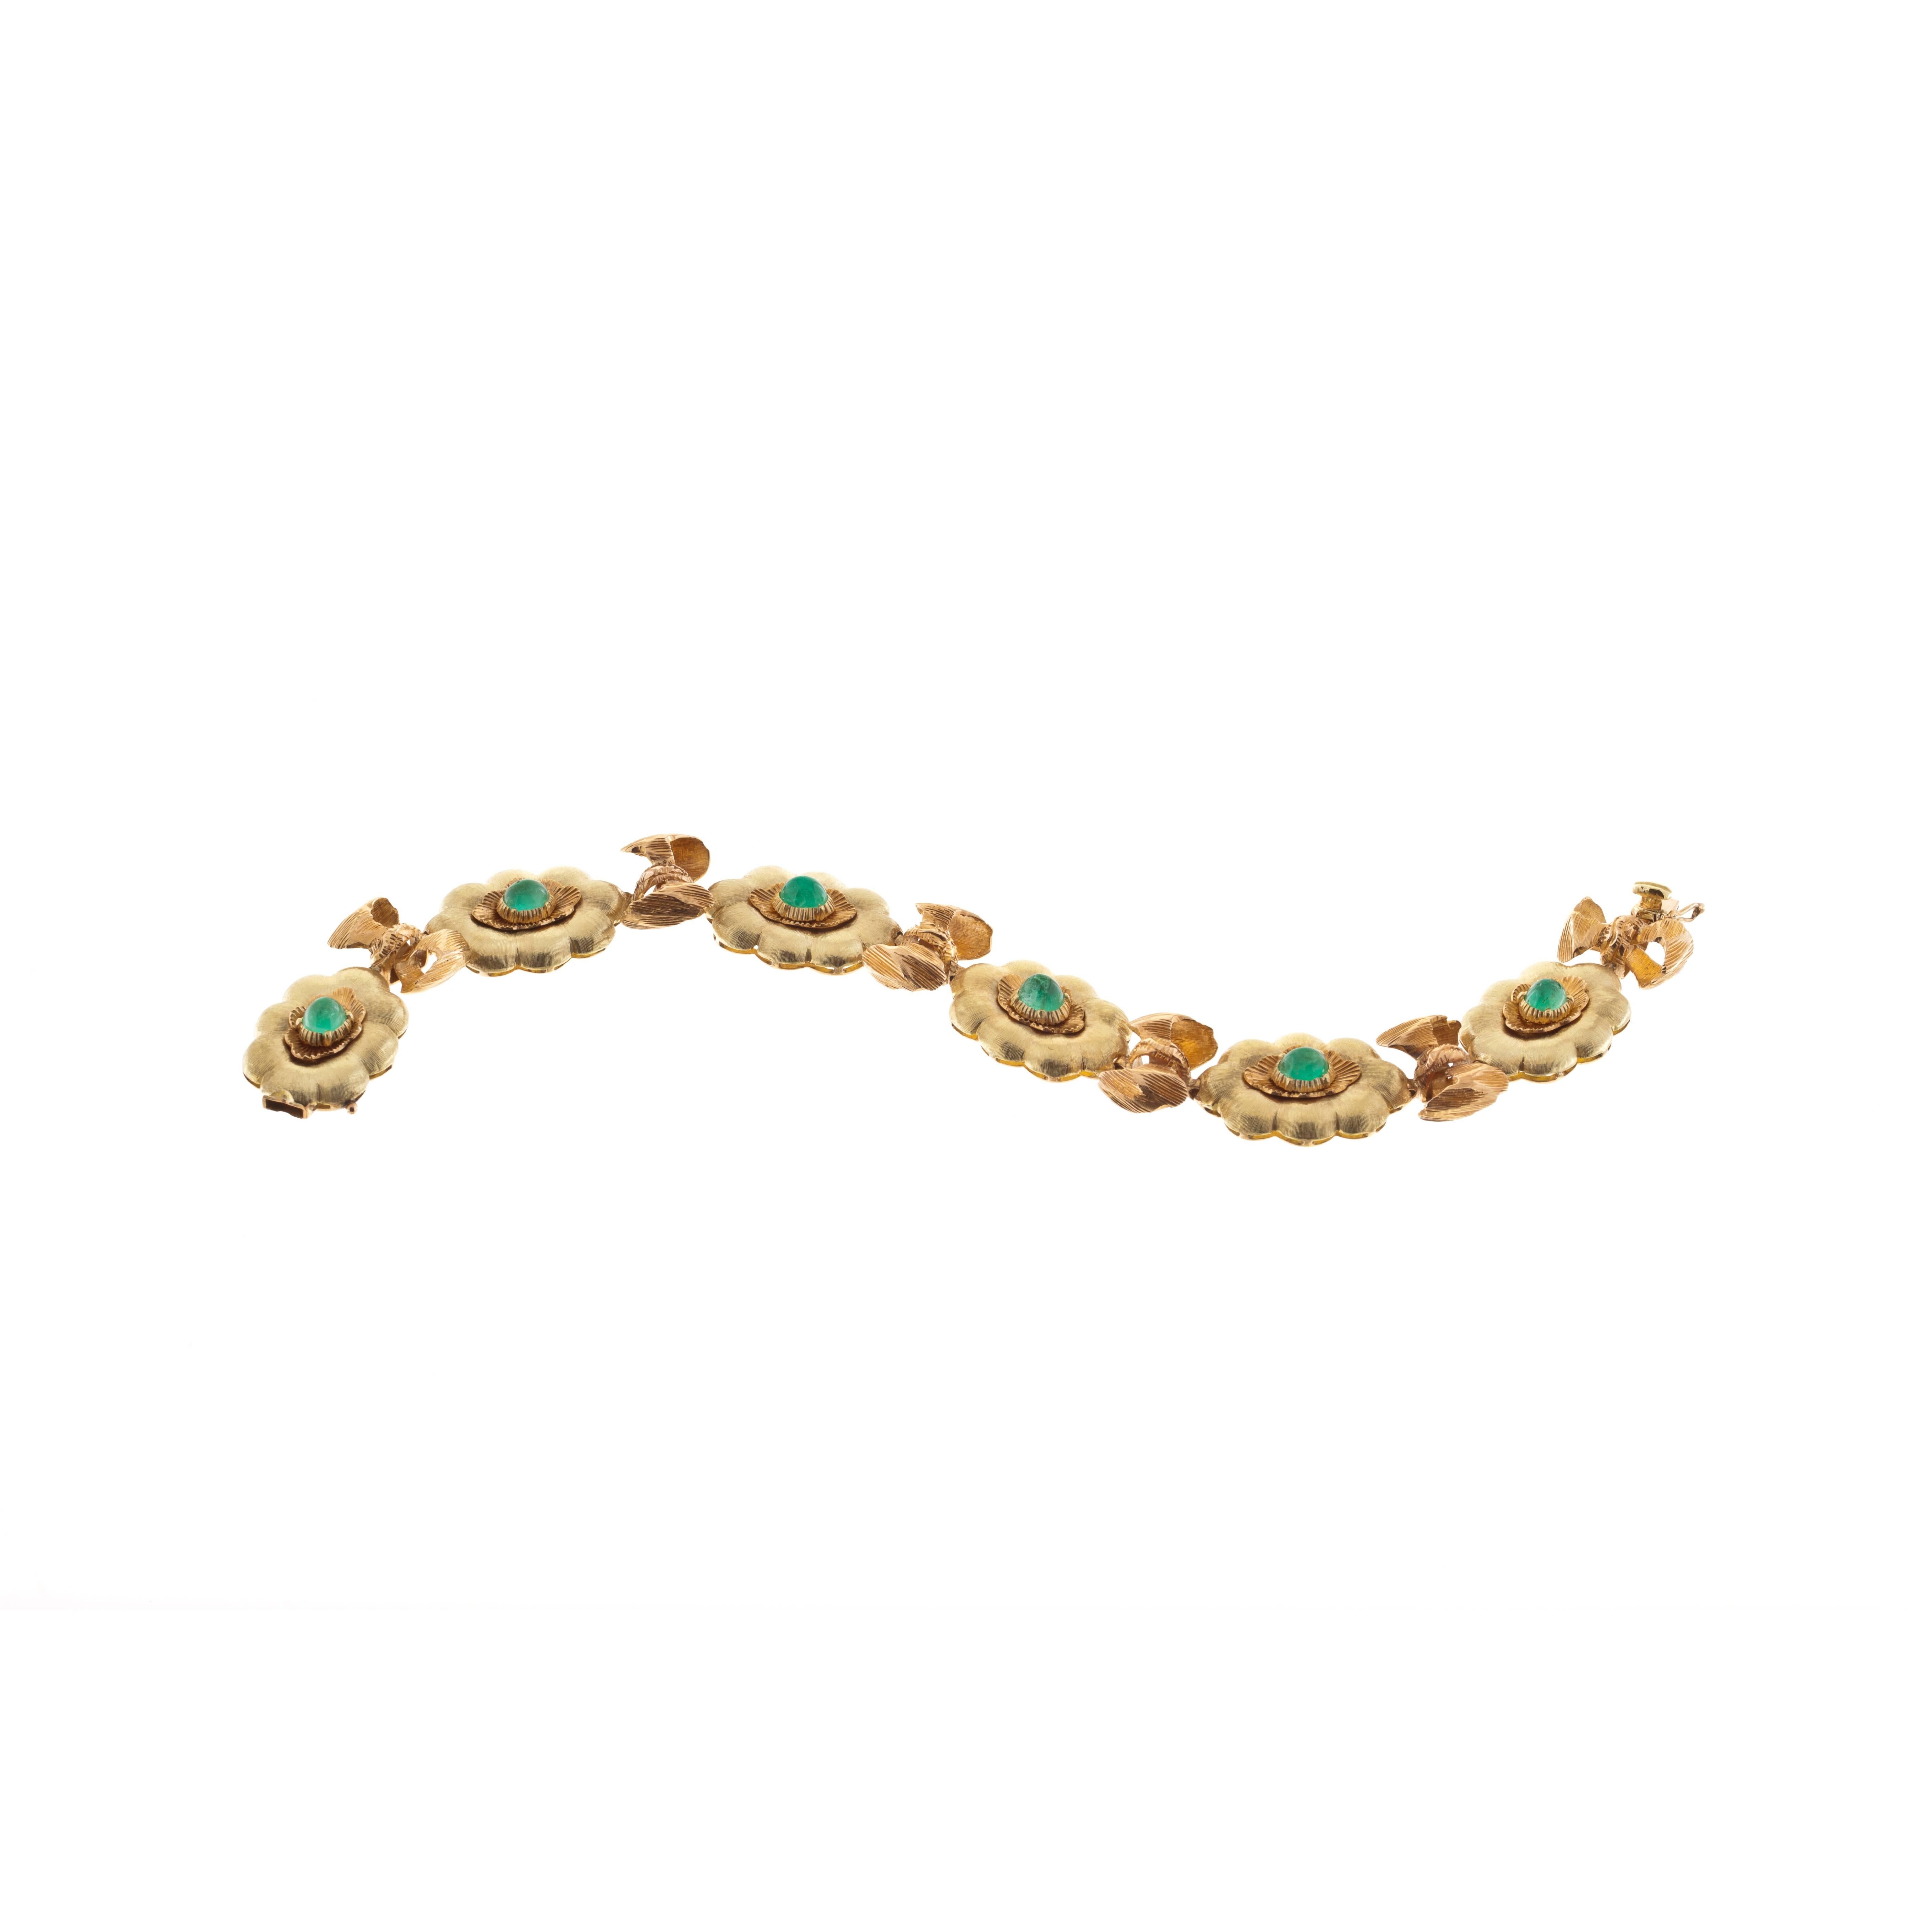 Buccellati bracelet composed of 18K yellow and rose gold with emeralds.  The bracelet is marked 